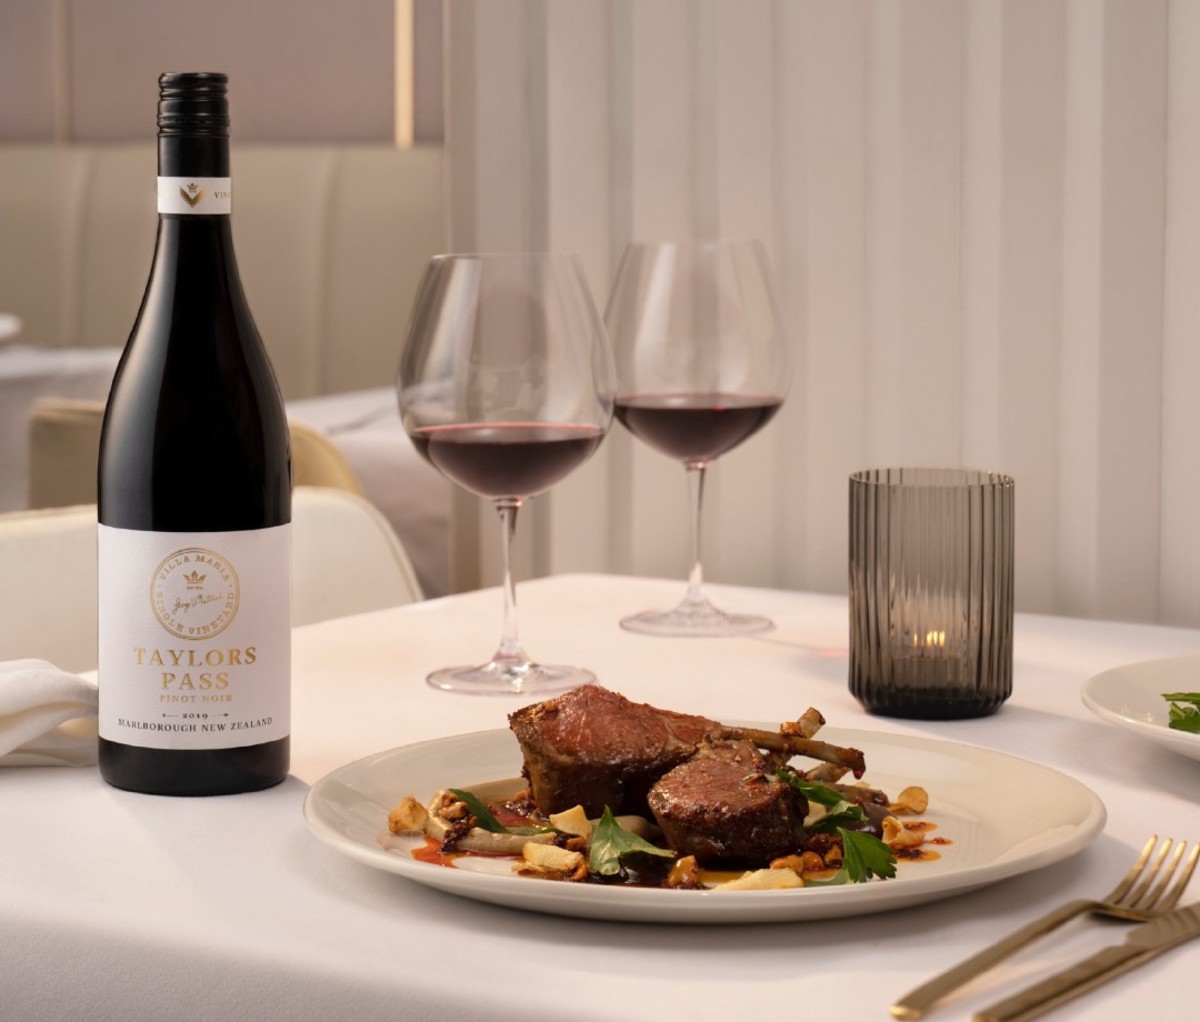 Bottle of 2018 Villa Maria Single Vineyard Taylors Pass Pinot Noir on a white linen table next to a dinner plate and two glasses of wine